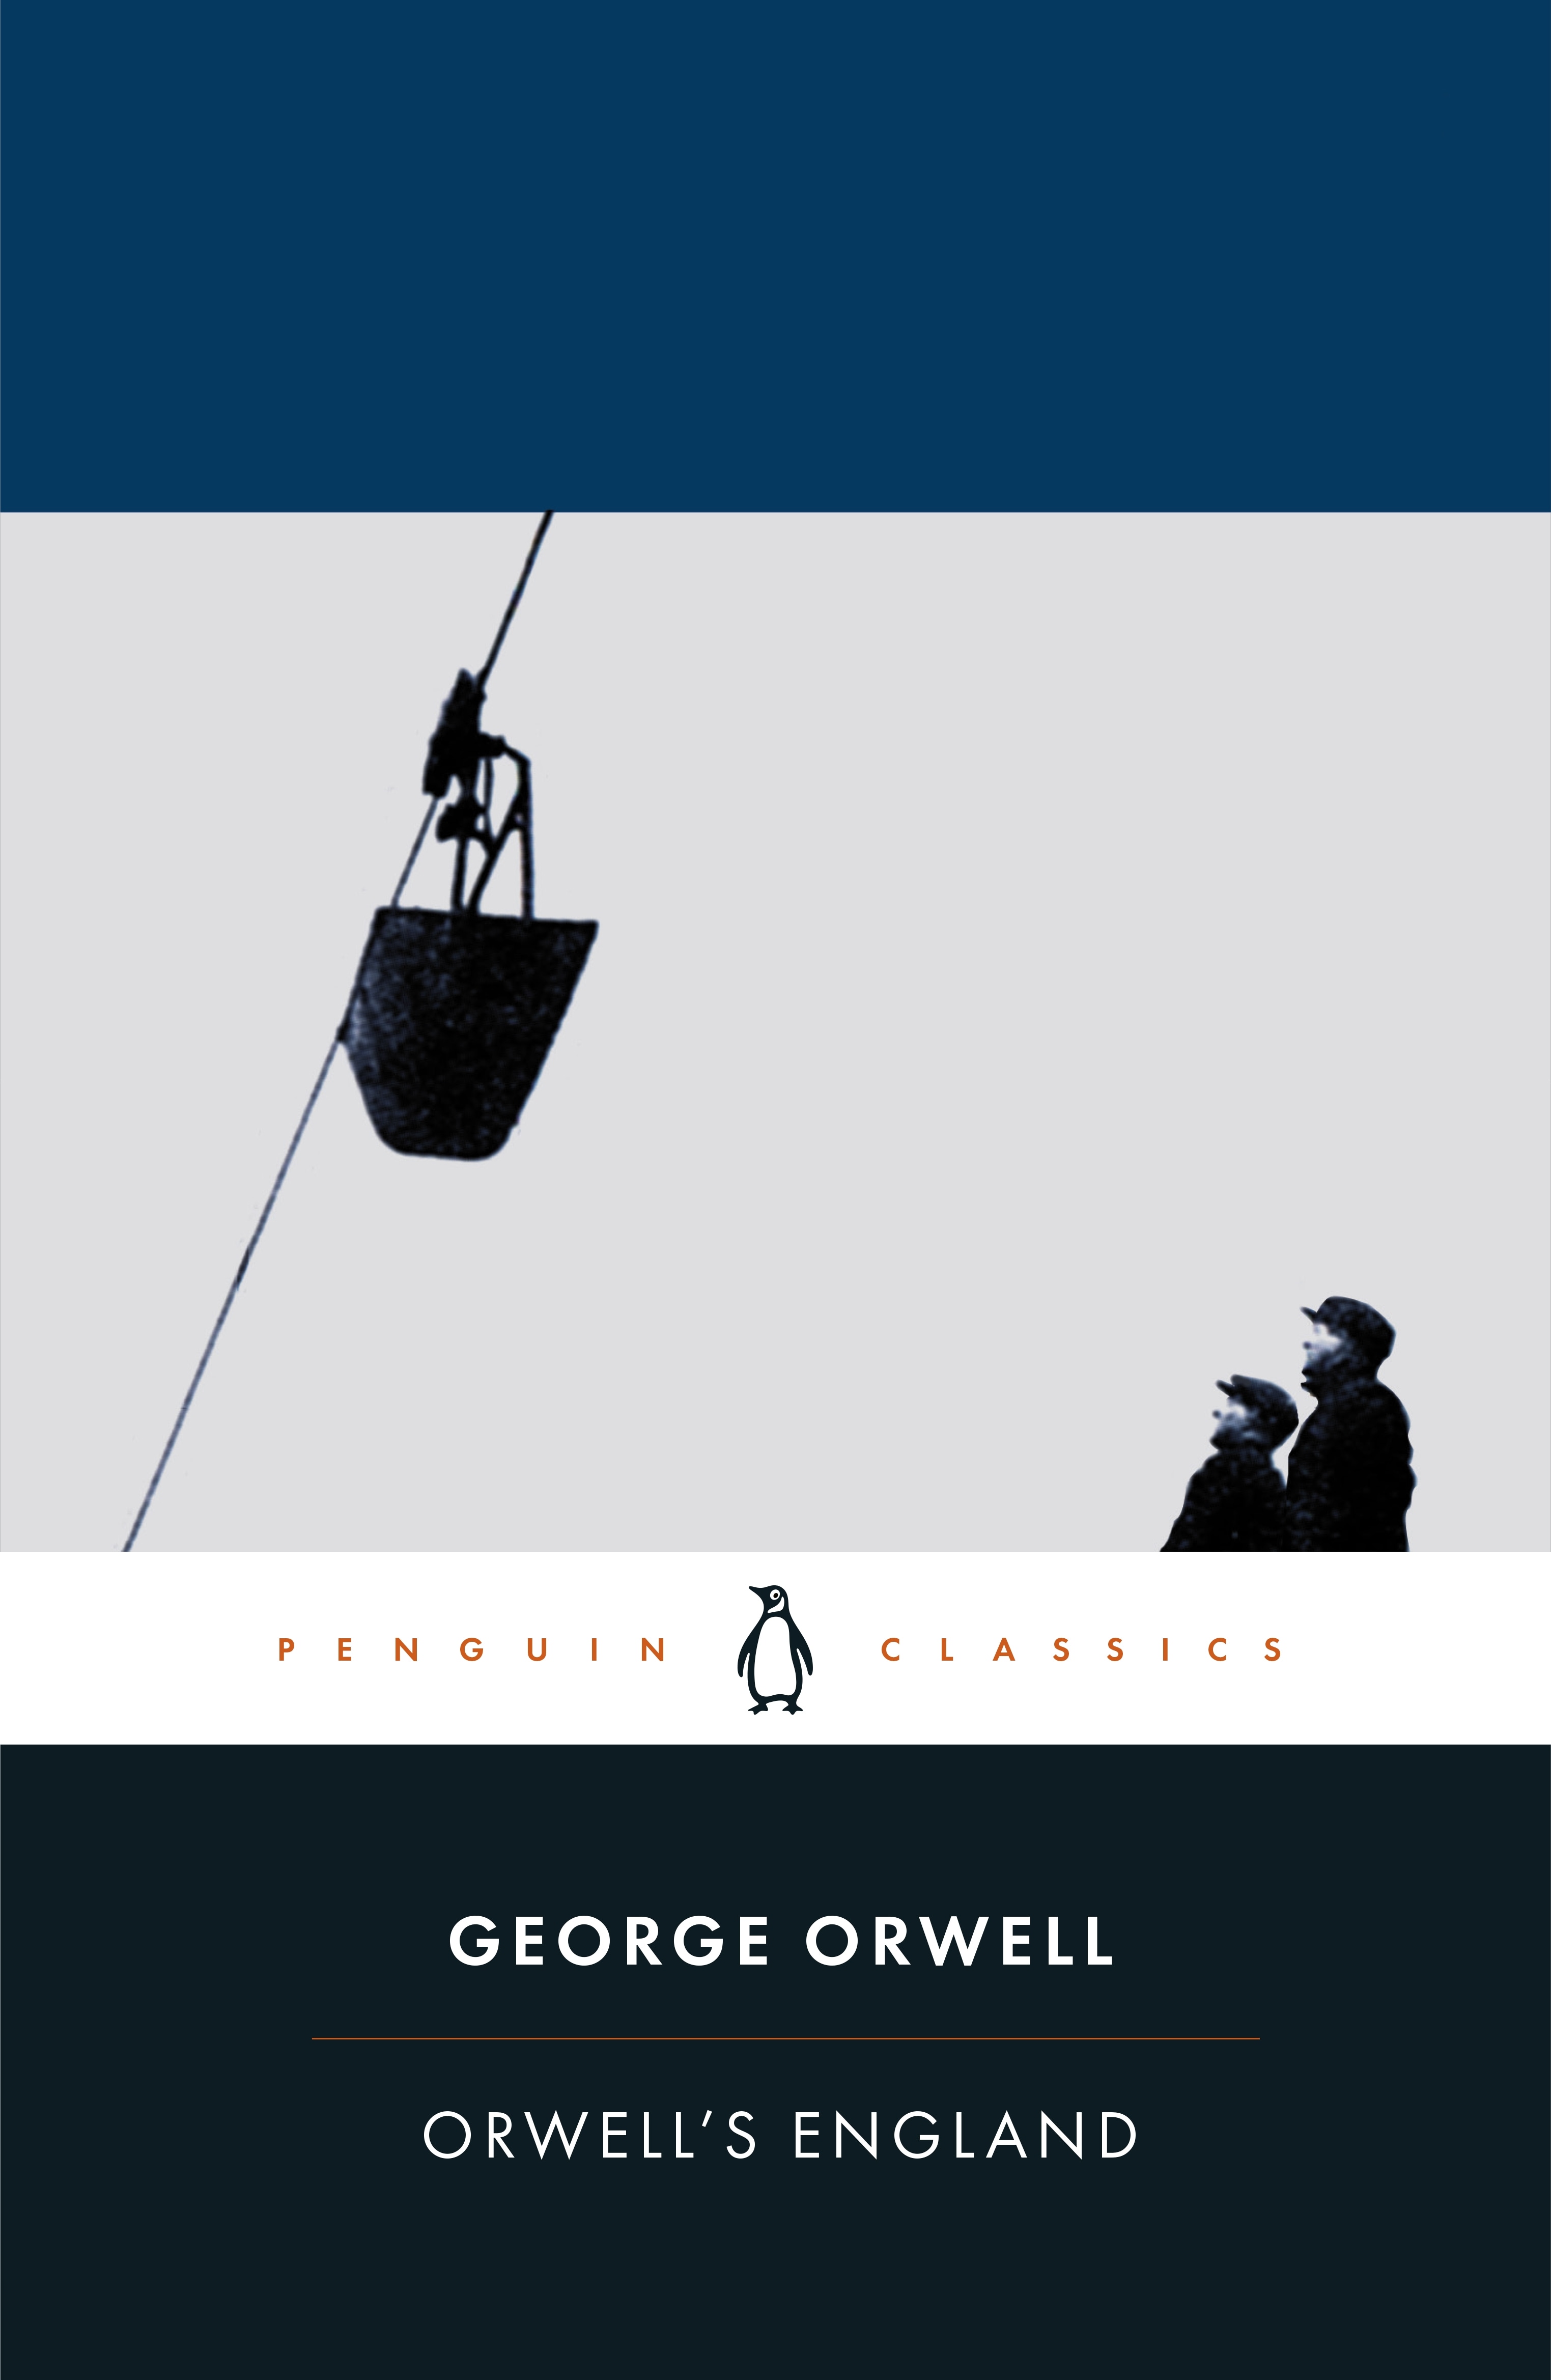 Book “Orwell's England” by George Orwell — October 1, 2020